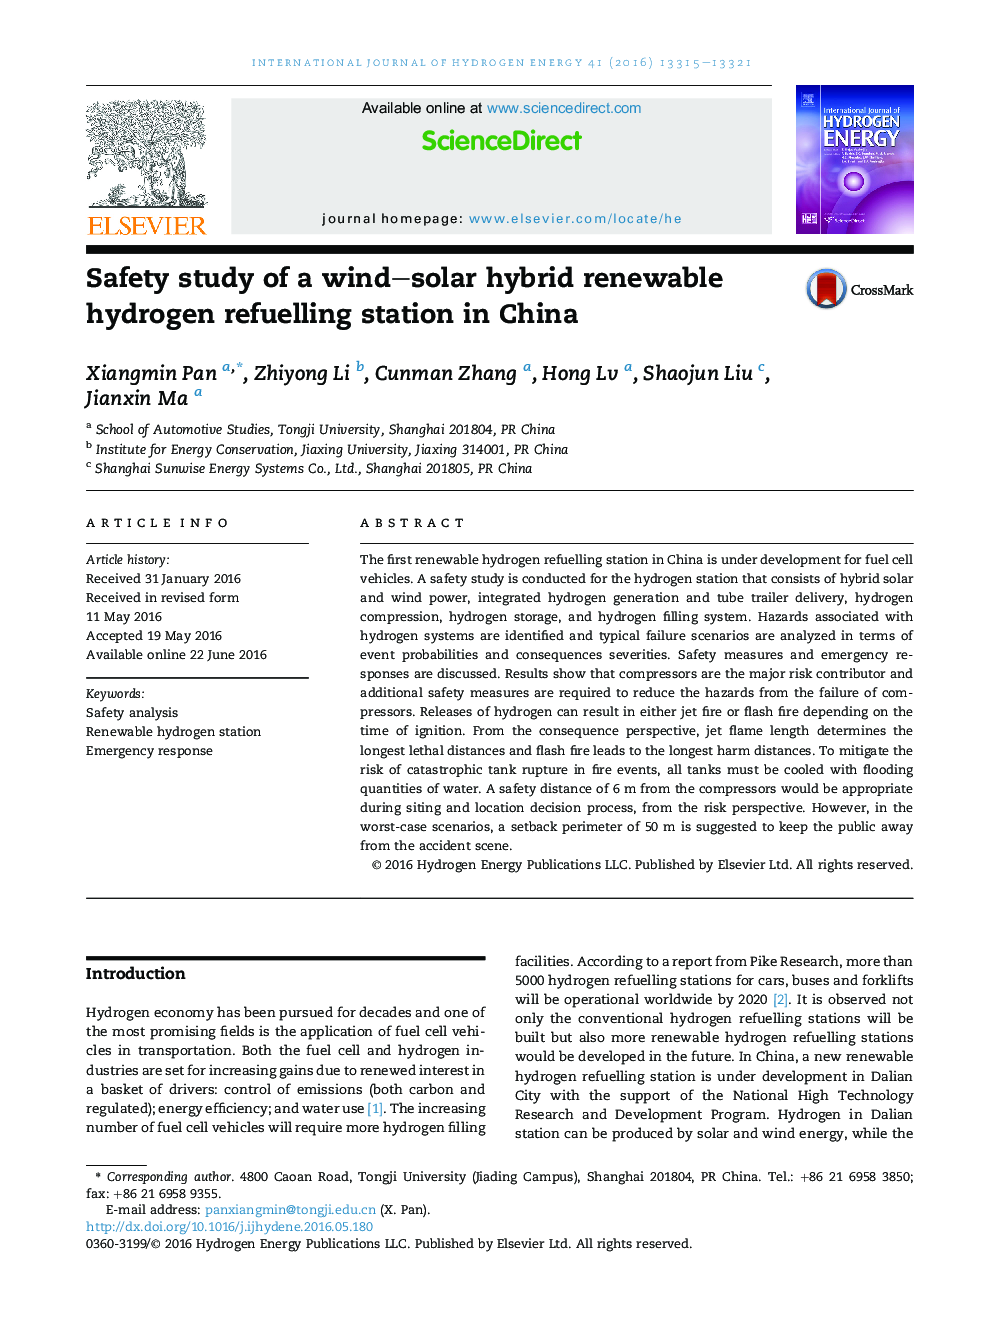 Safety study of a wind–solar hybrid renewable hydrogen refuelling station in China